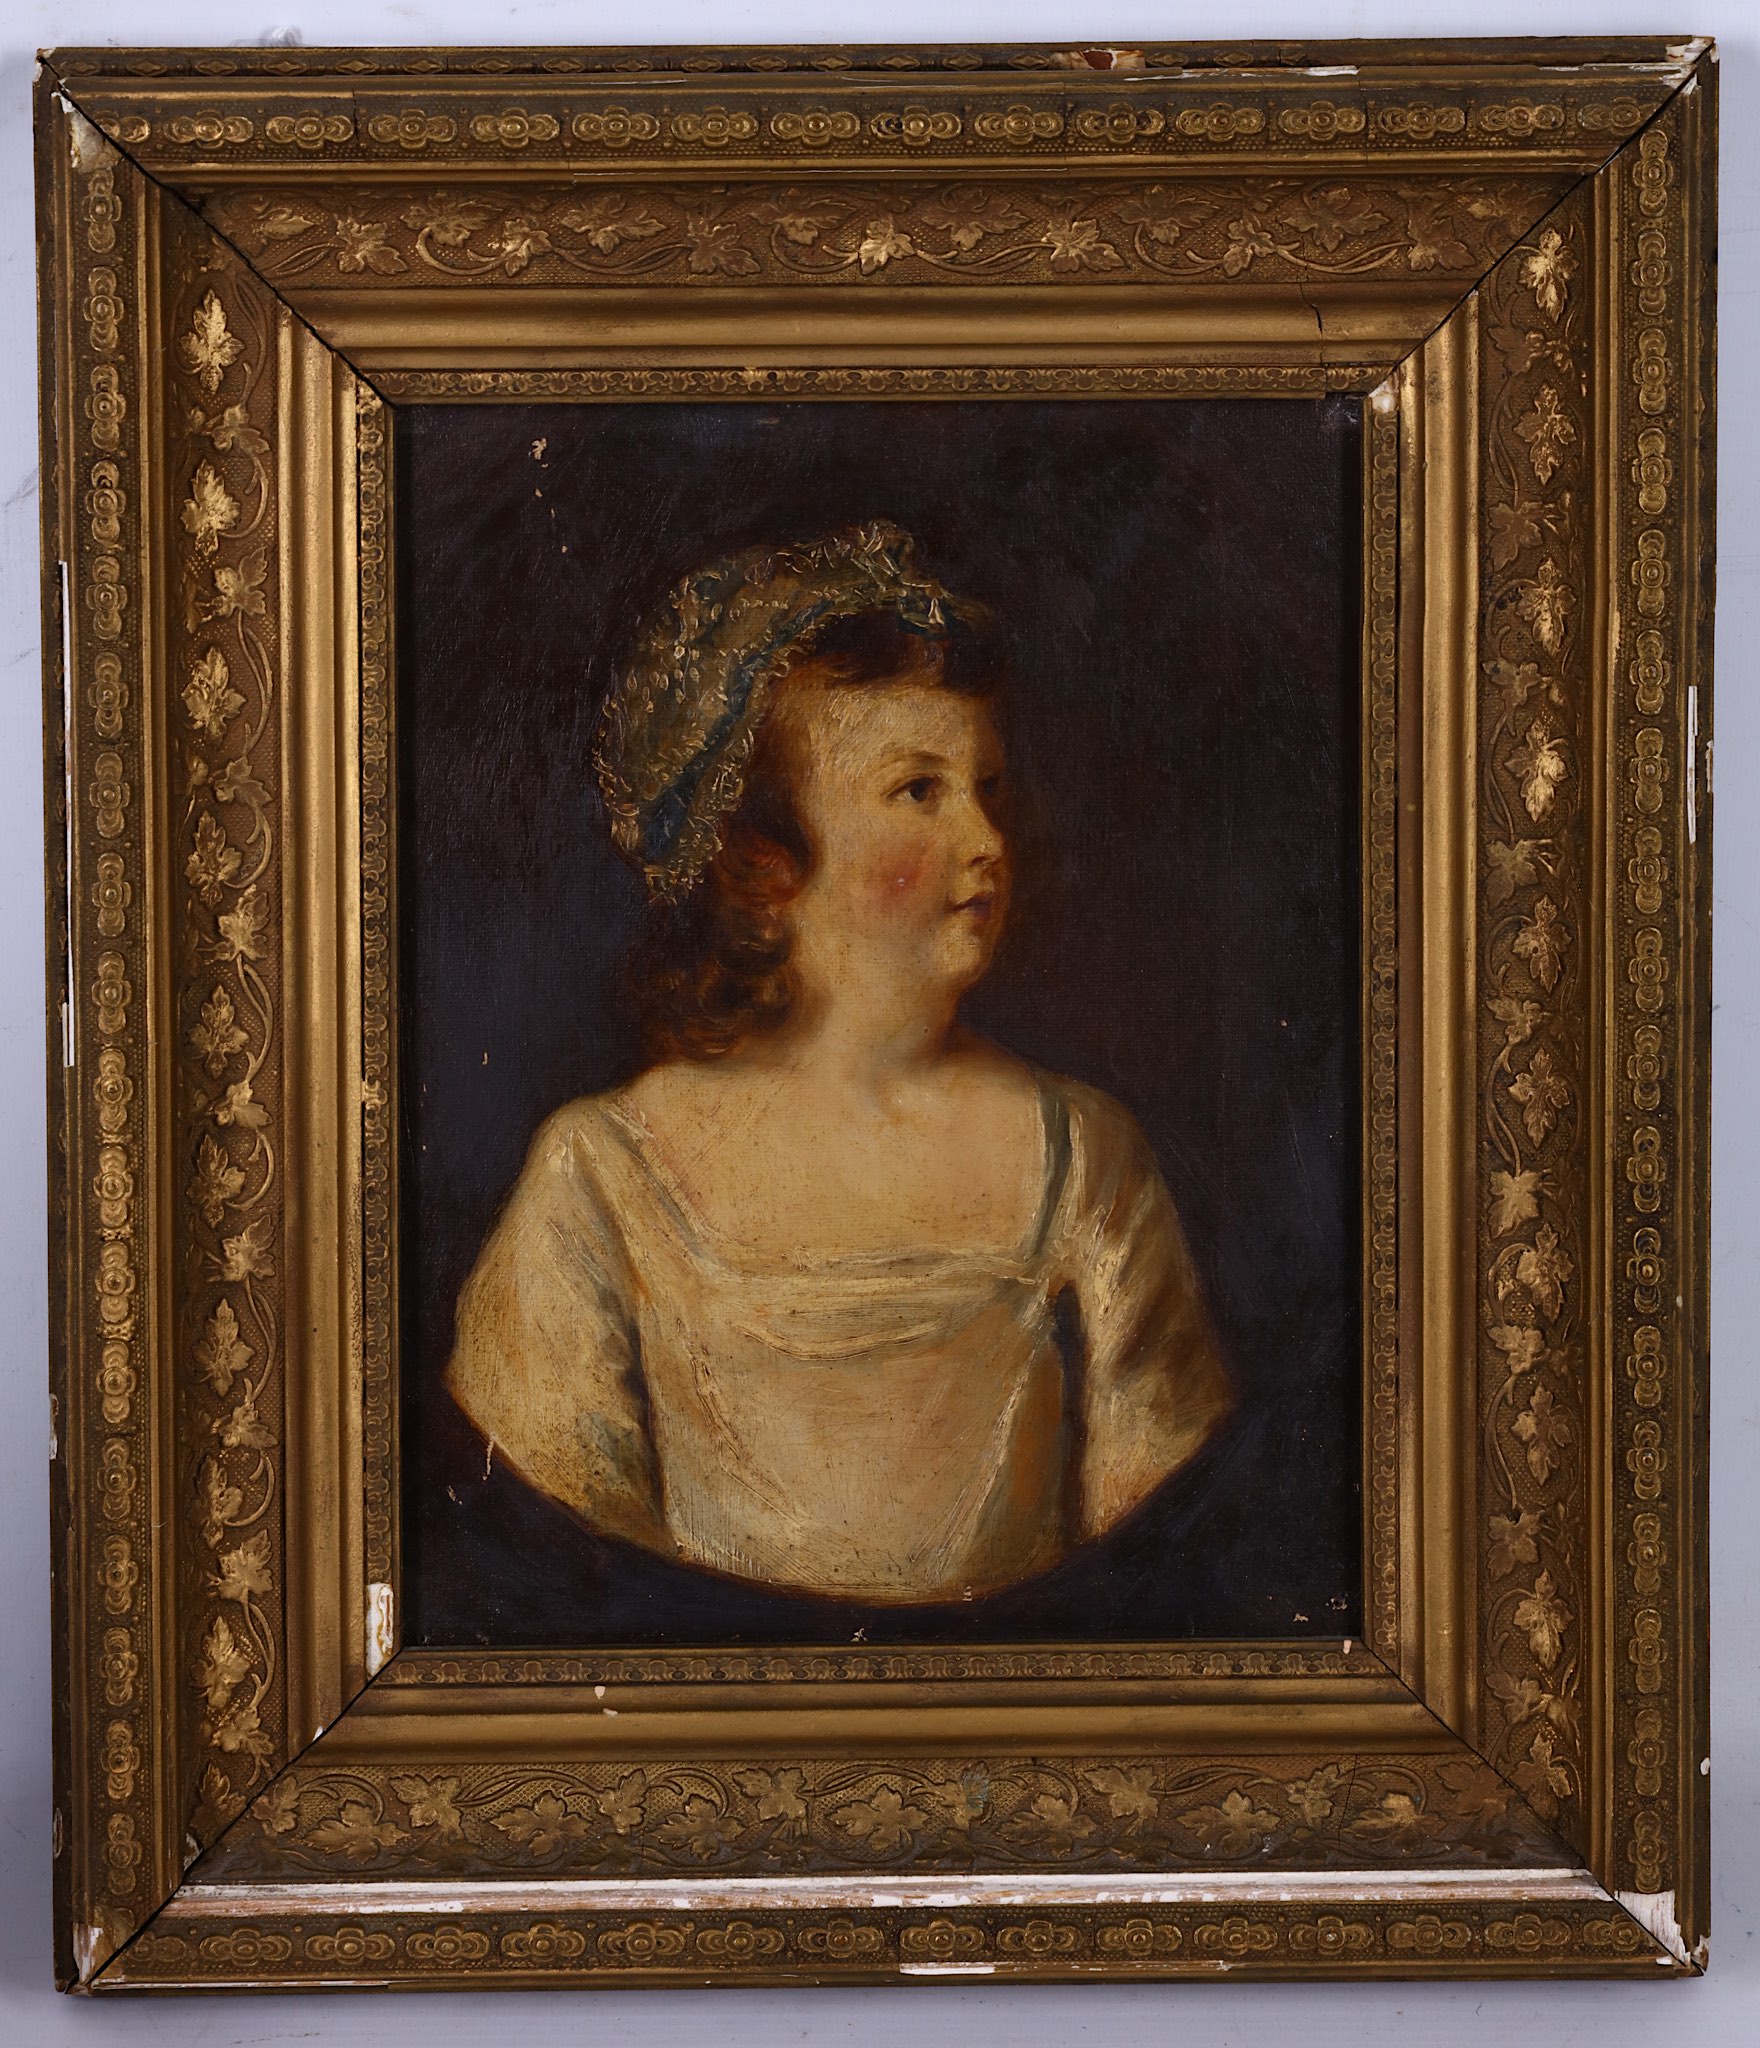 Mid 19th Century English school, portrait of a young girl in lace bonnet, oil on canvas, 24 x 19cm.